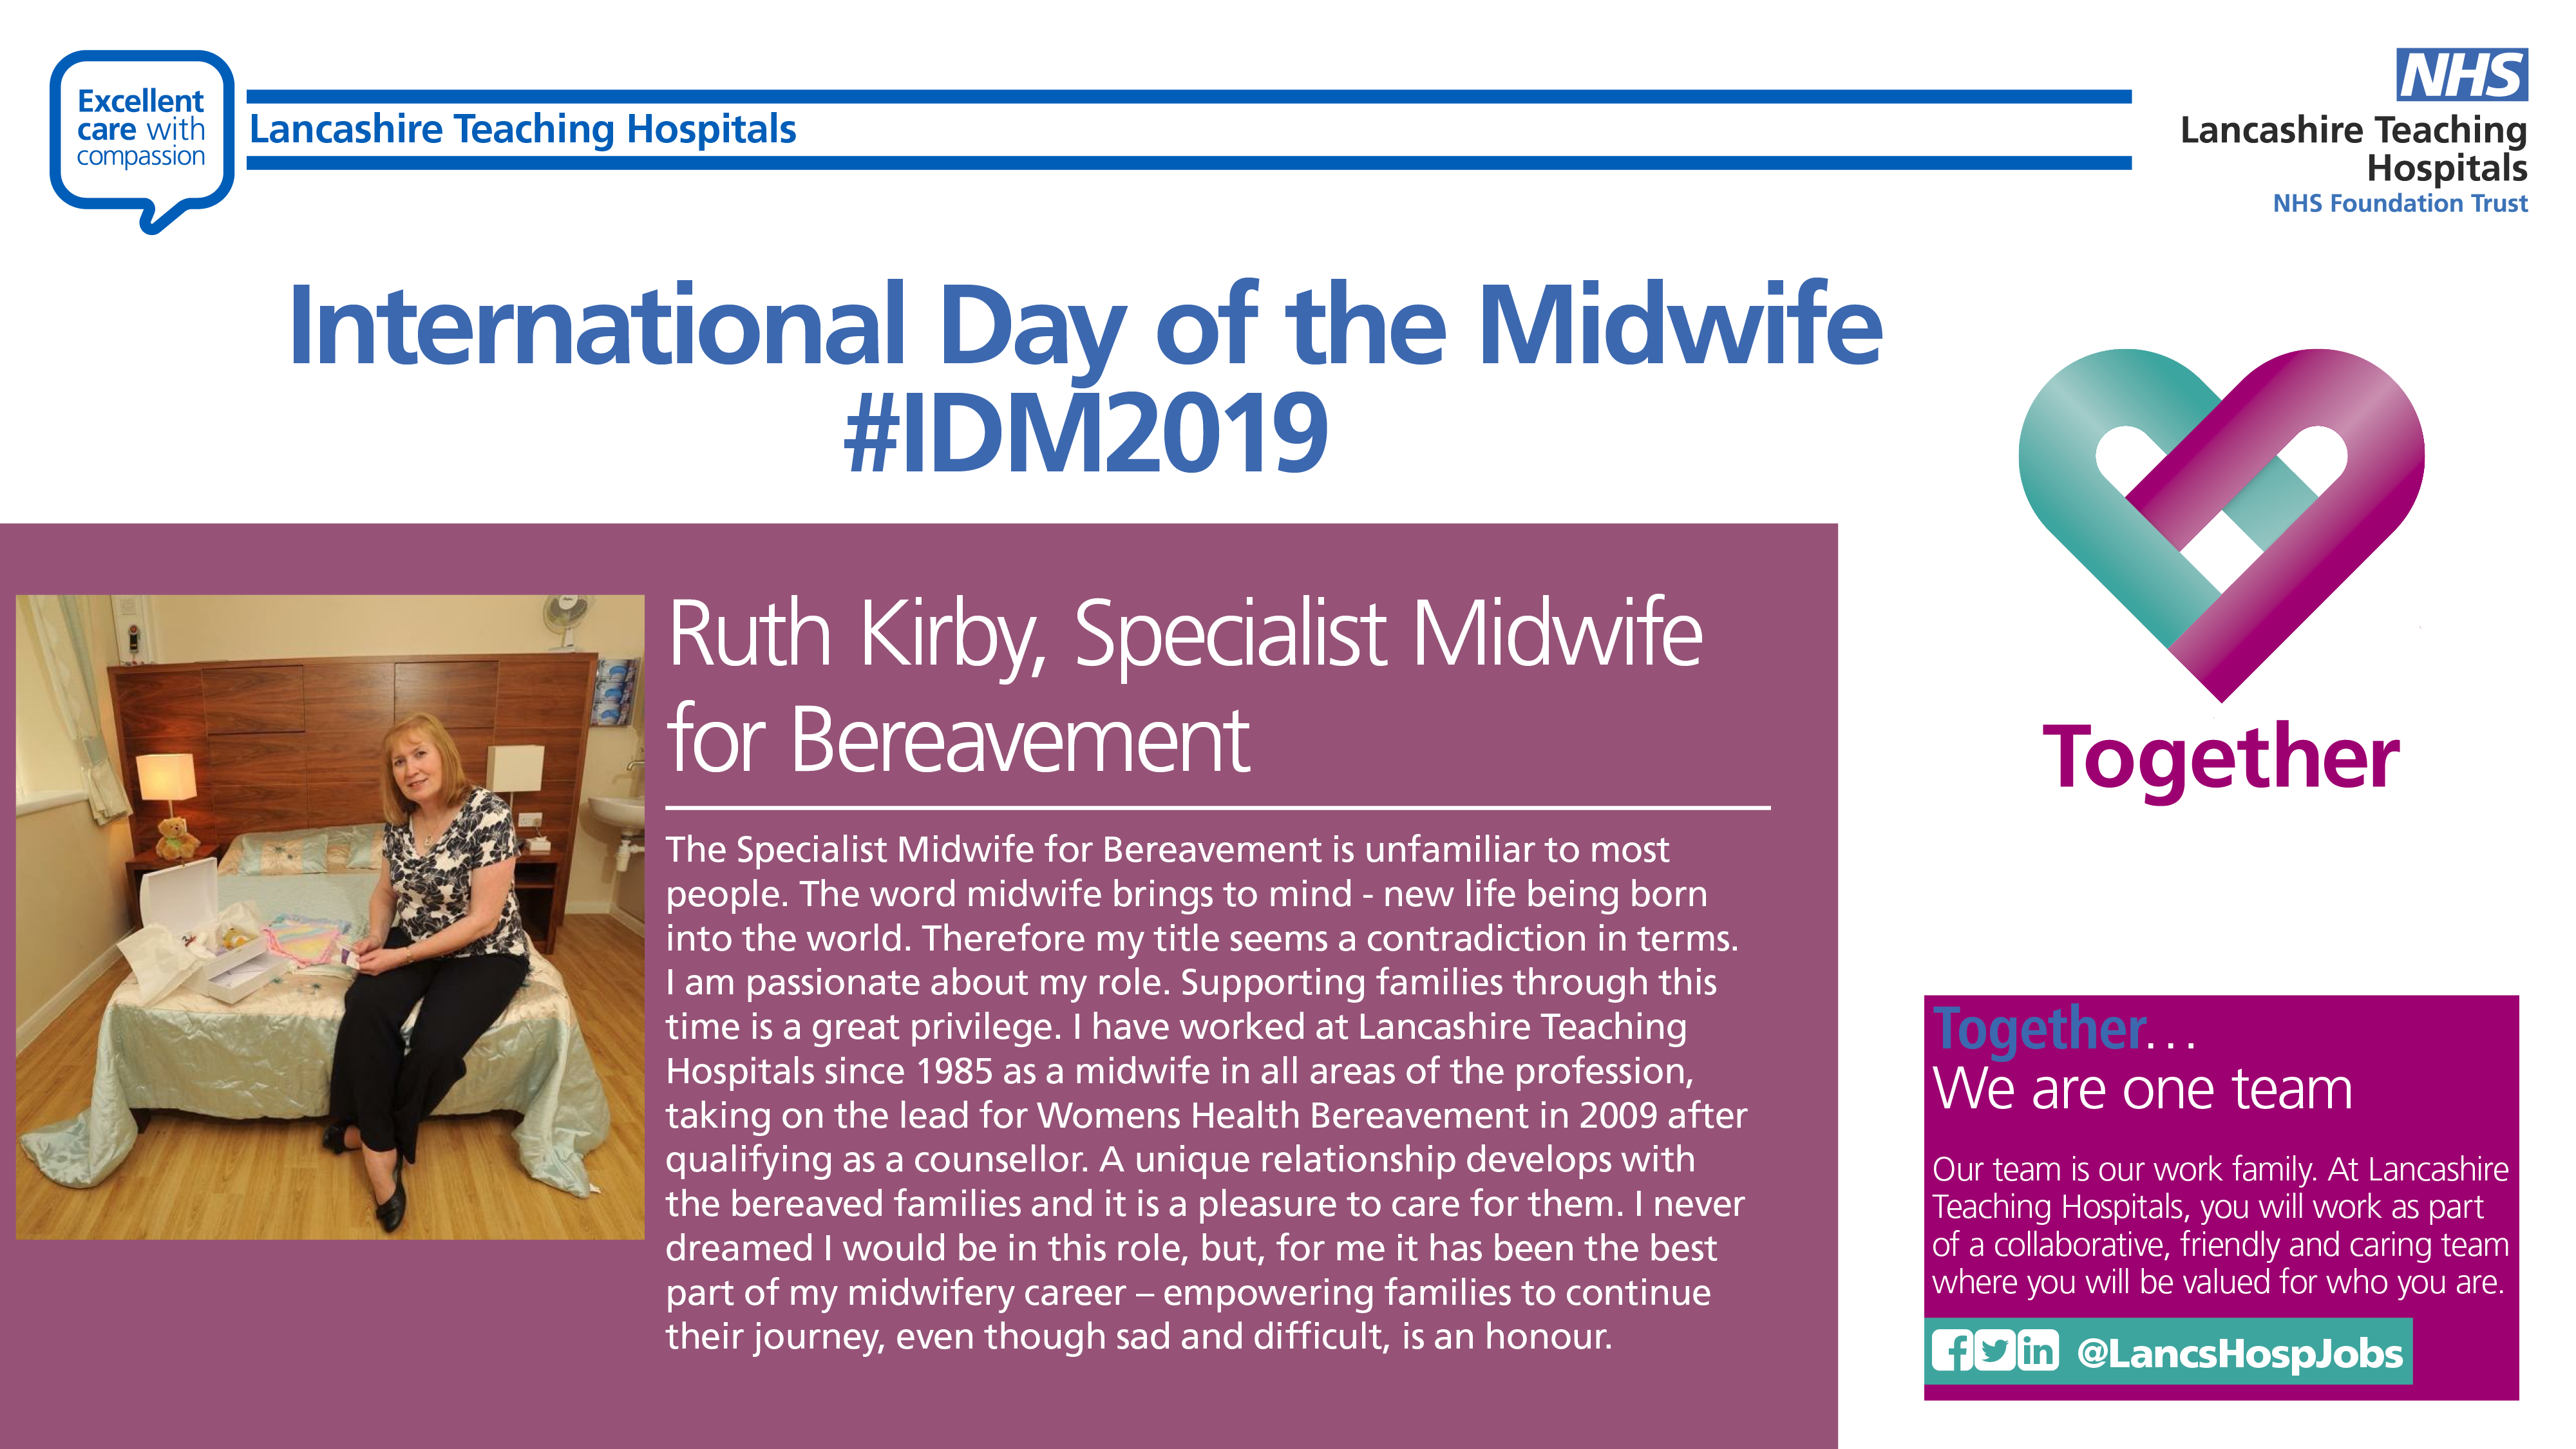 Celebrating midwives for International Day of the Midwife featured image